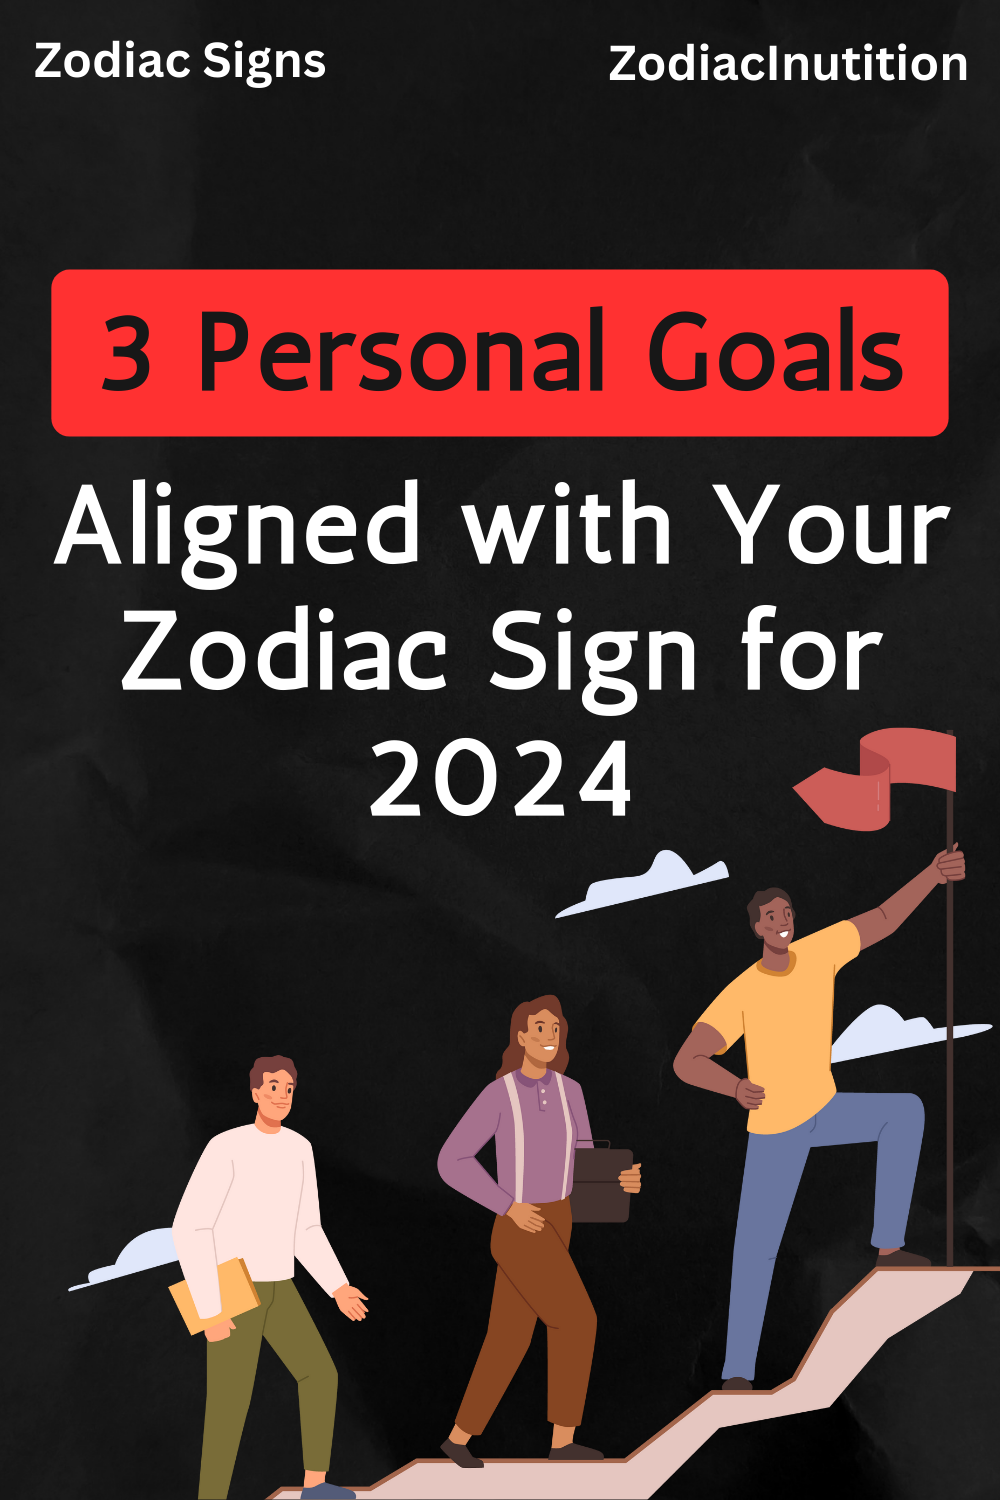 3 Personal Goals Aligned with Your Zodiac Sign for 2024